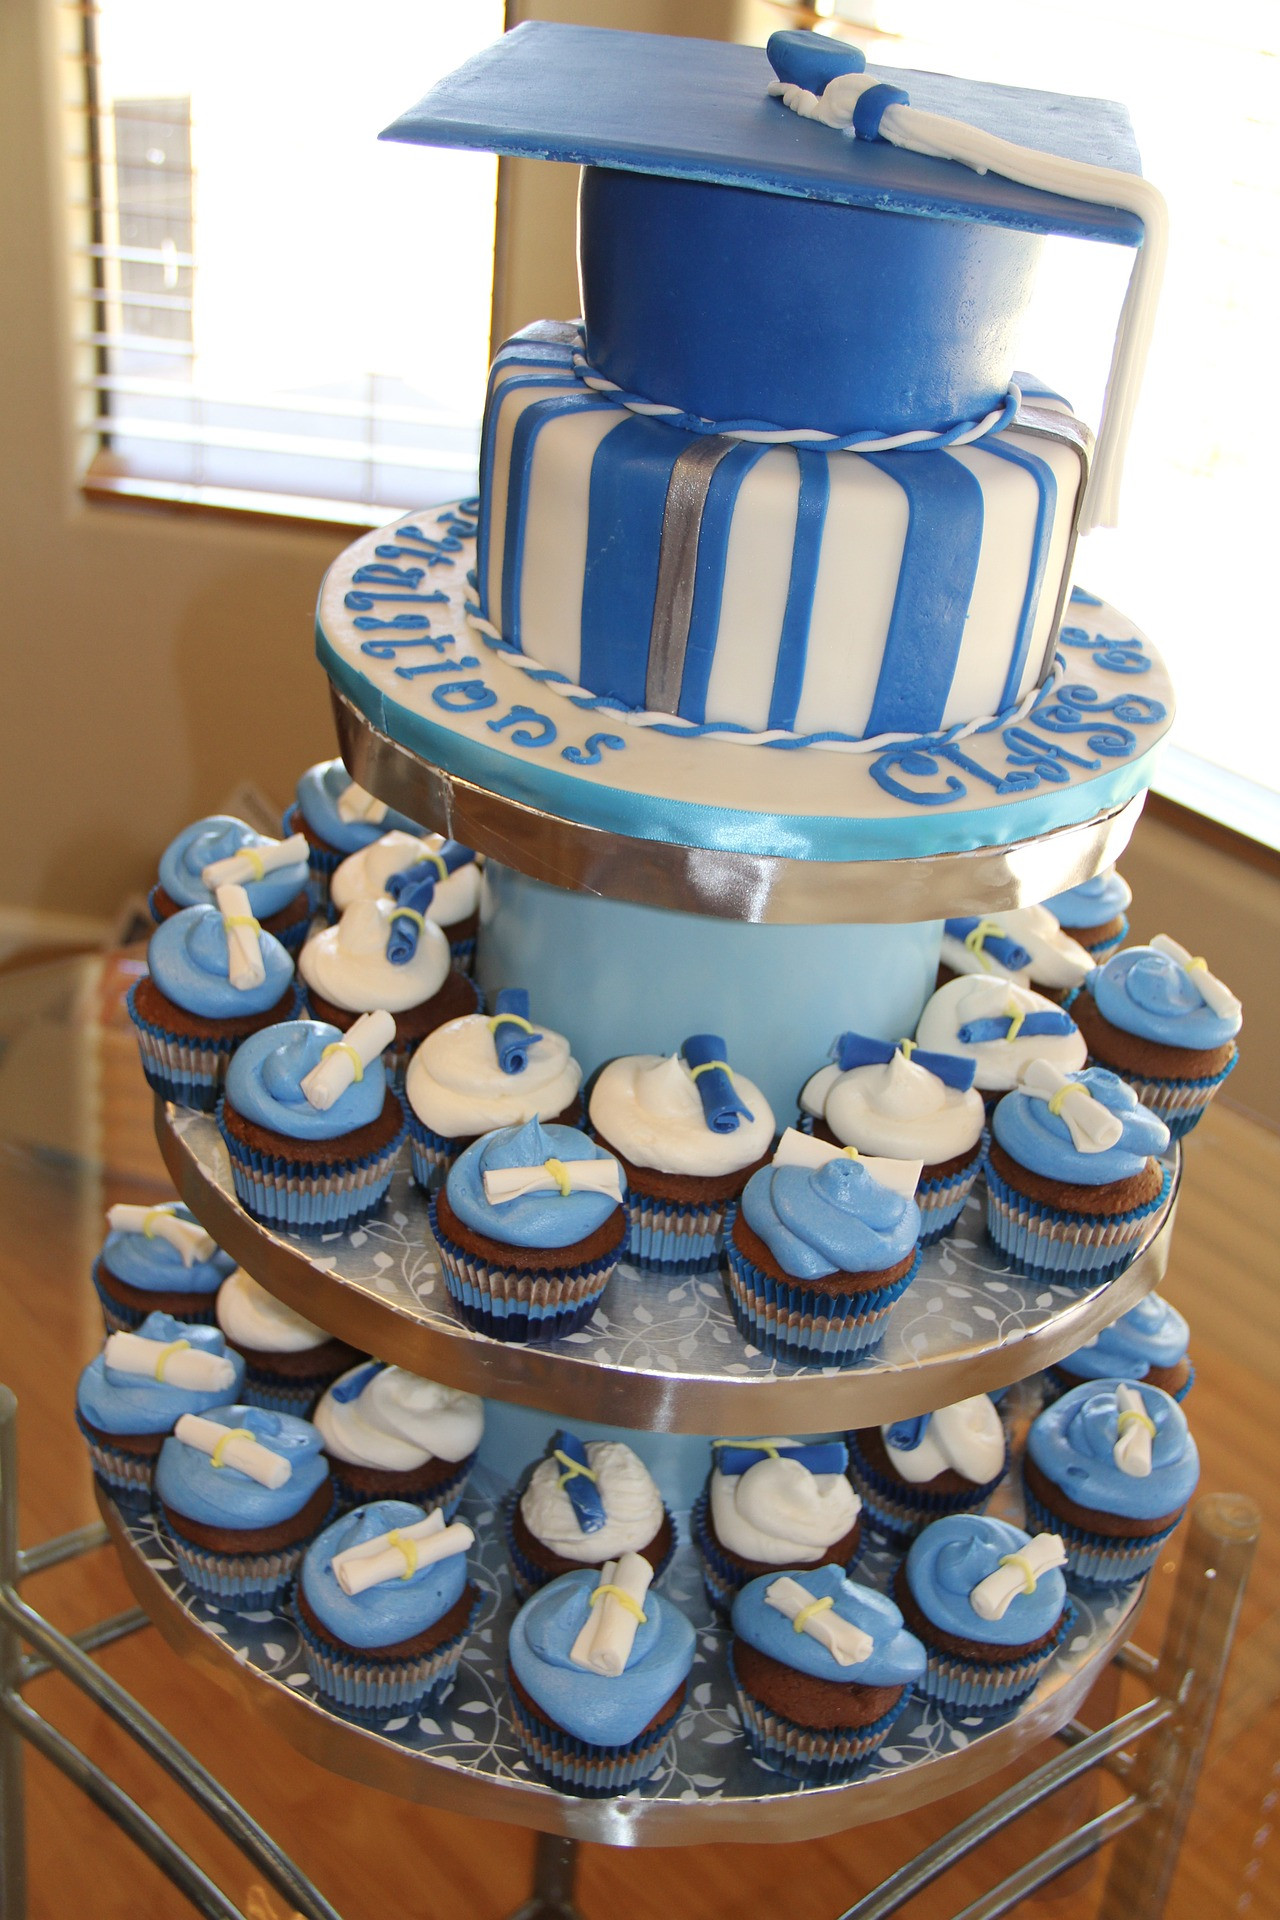 Graduation Party Cake Ideas
 7 Best of the Best Graduation Cakes – Choose The Perfect Cake